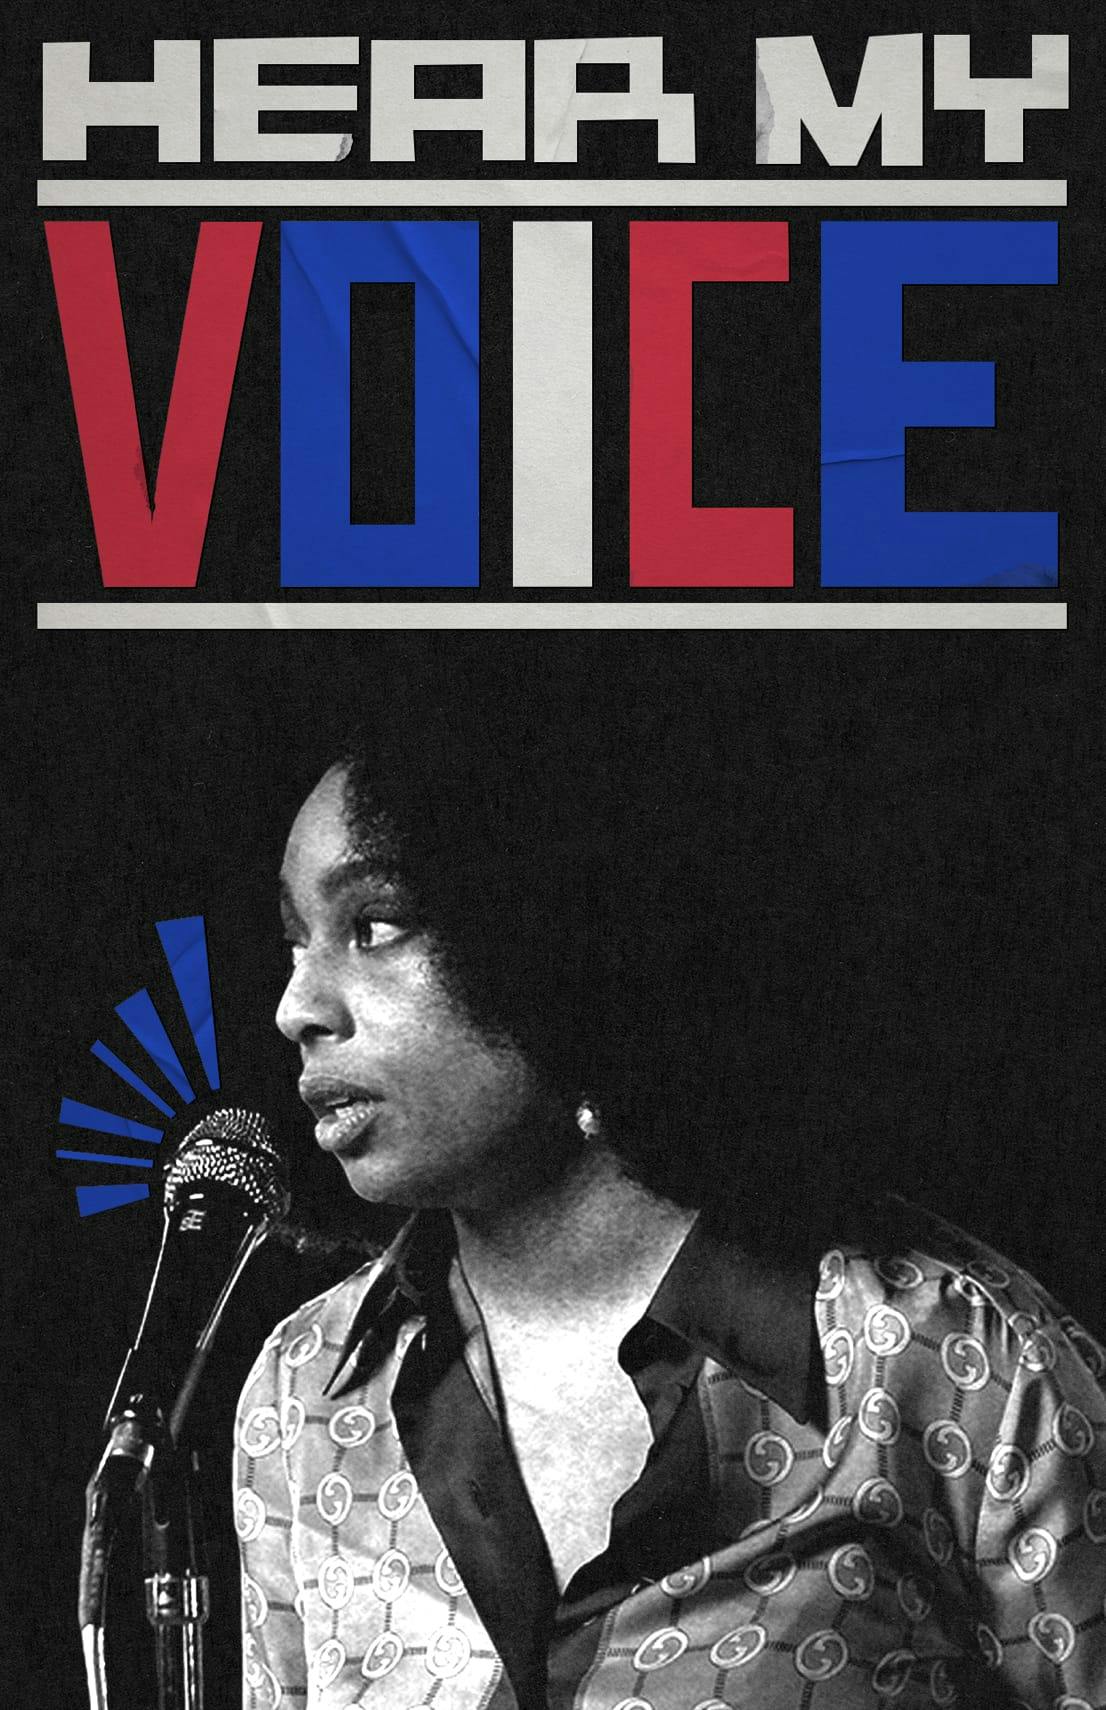 A black and white photo of singer Celeste as she stands at a microphone. The photo is treated in the style of a protest poster with “Hear My Voice” in big letters above her, announcing the title of her song for The Trial of the Chicago 7. 